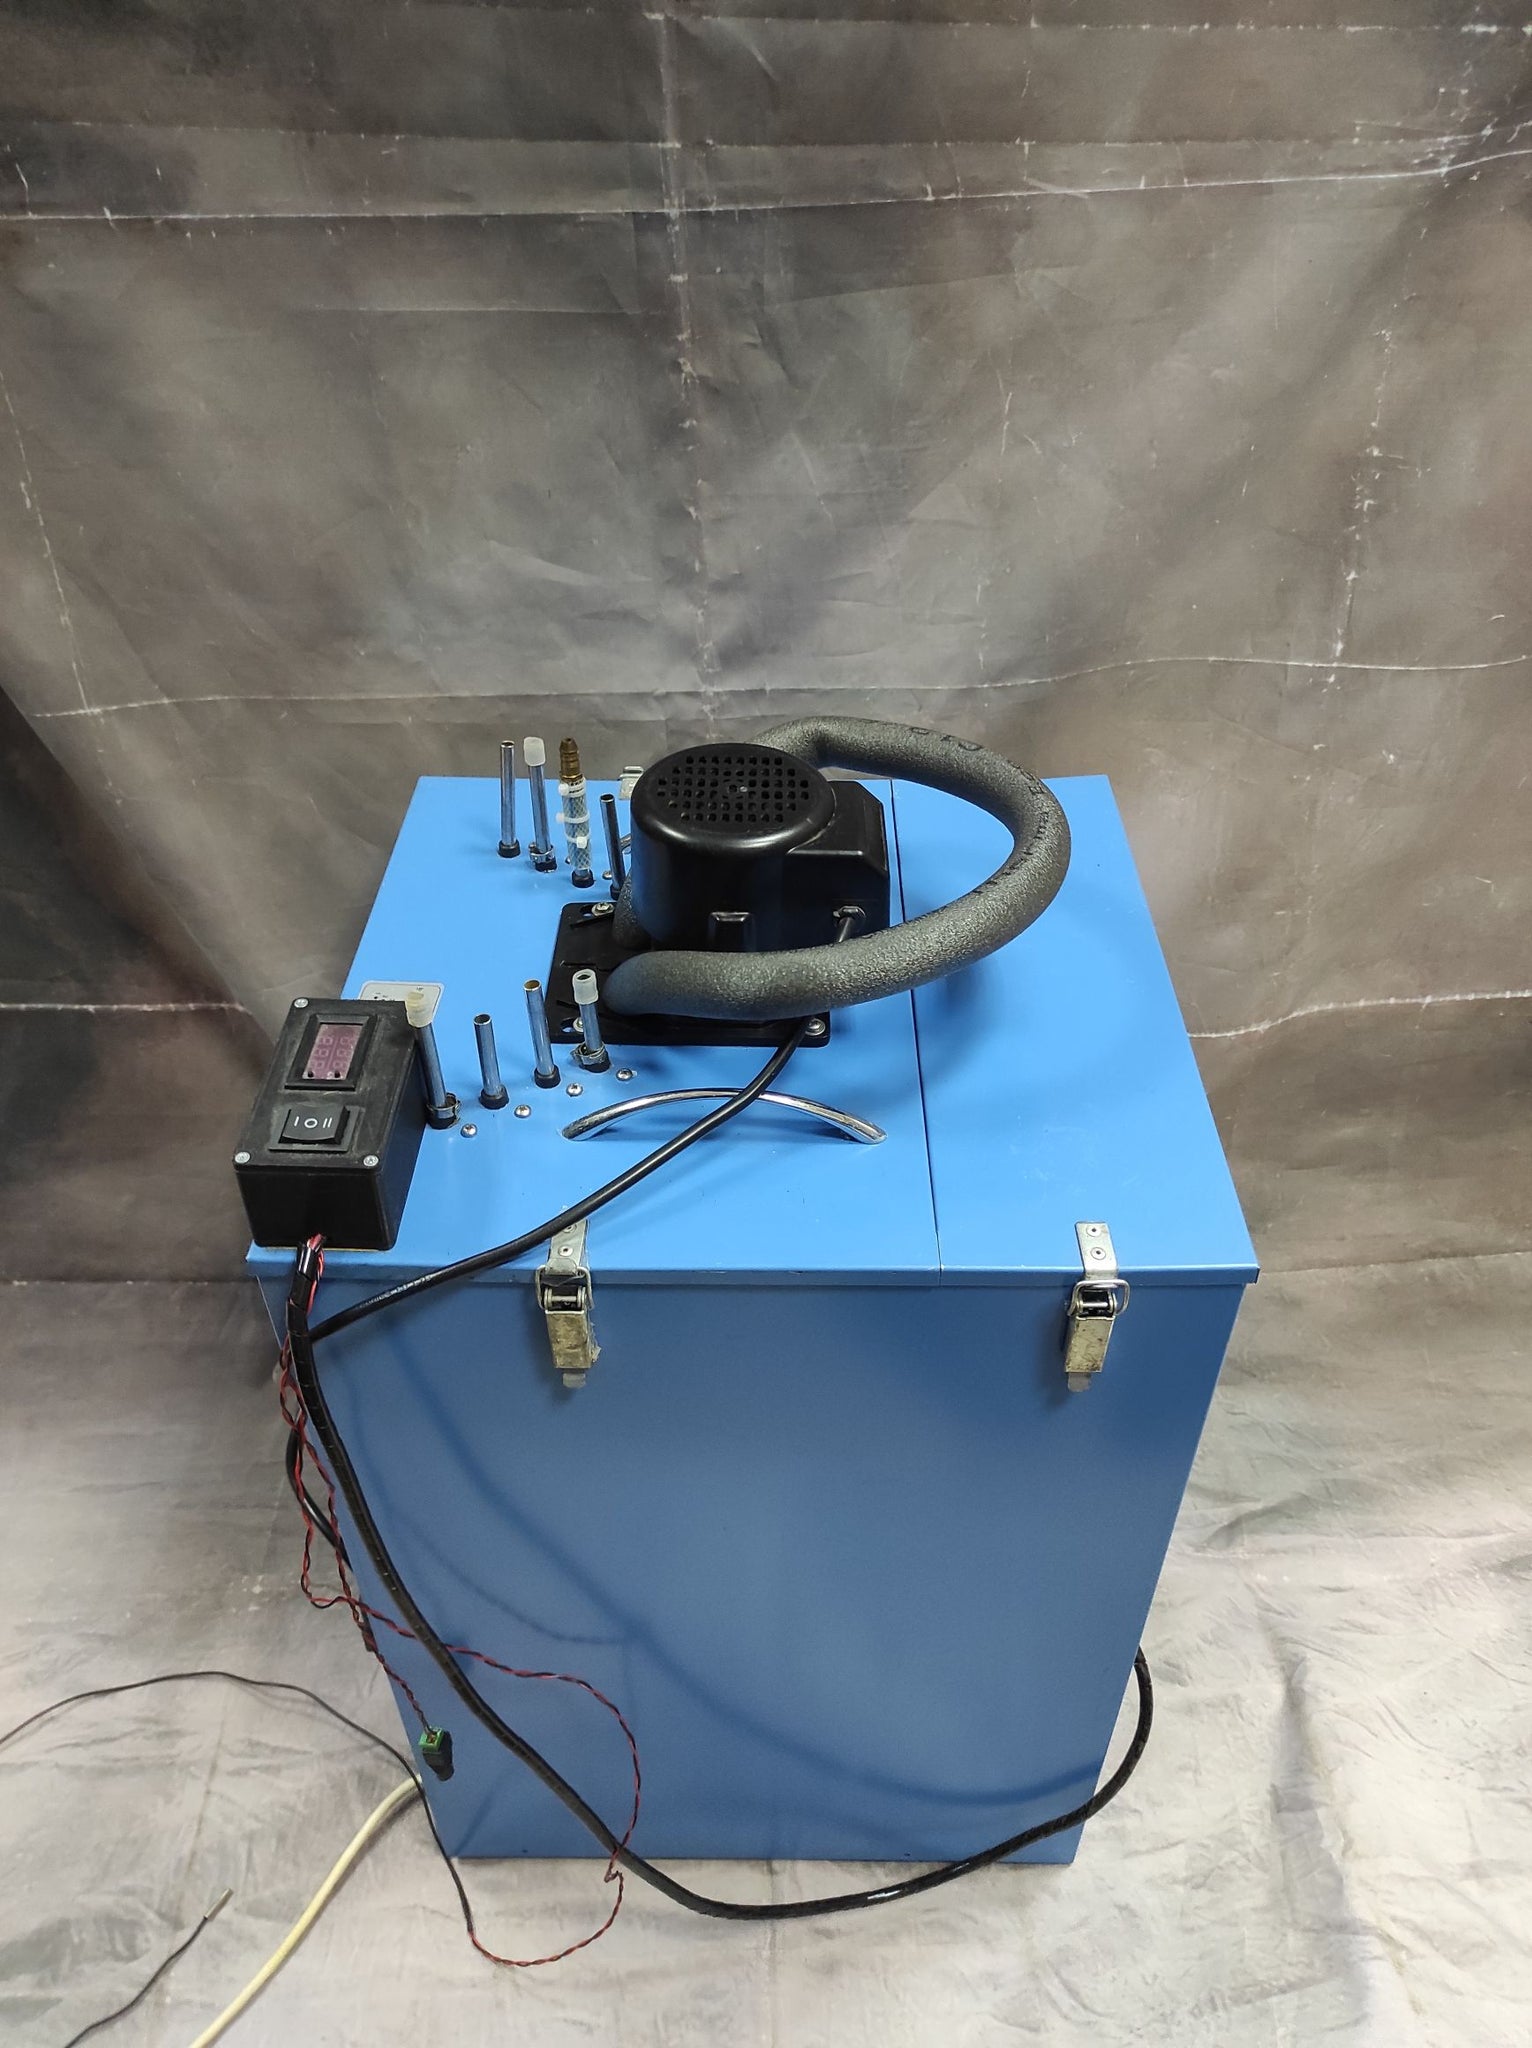 A industrial water chiller for DPSS, fiber, Co2 lasers – Endurance Lasers